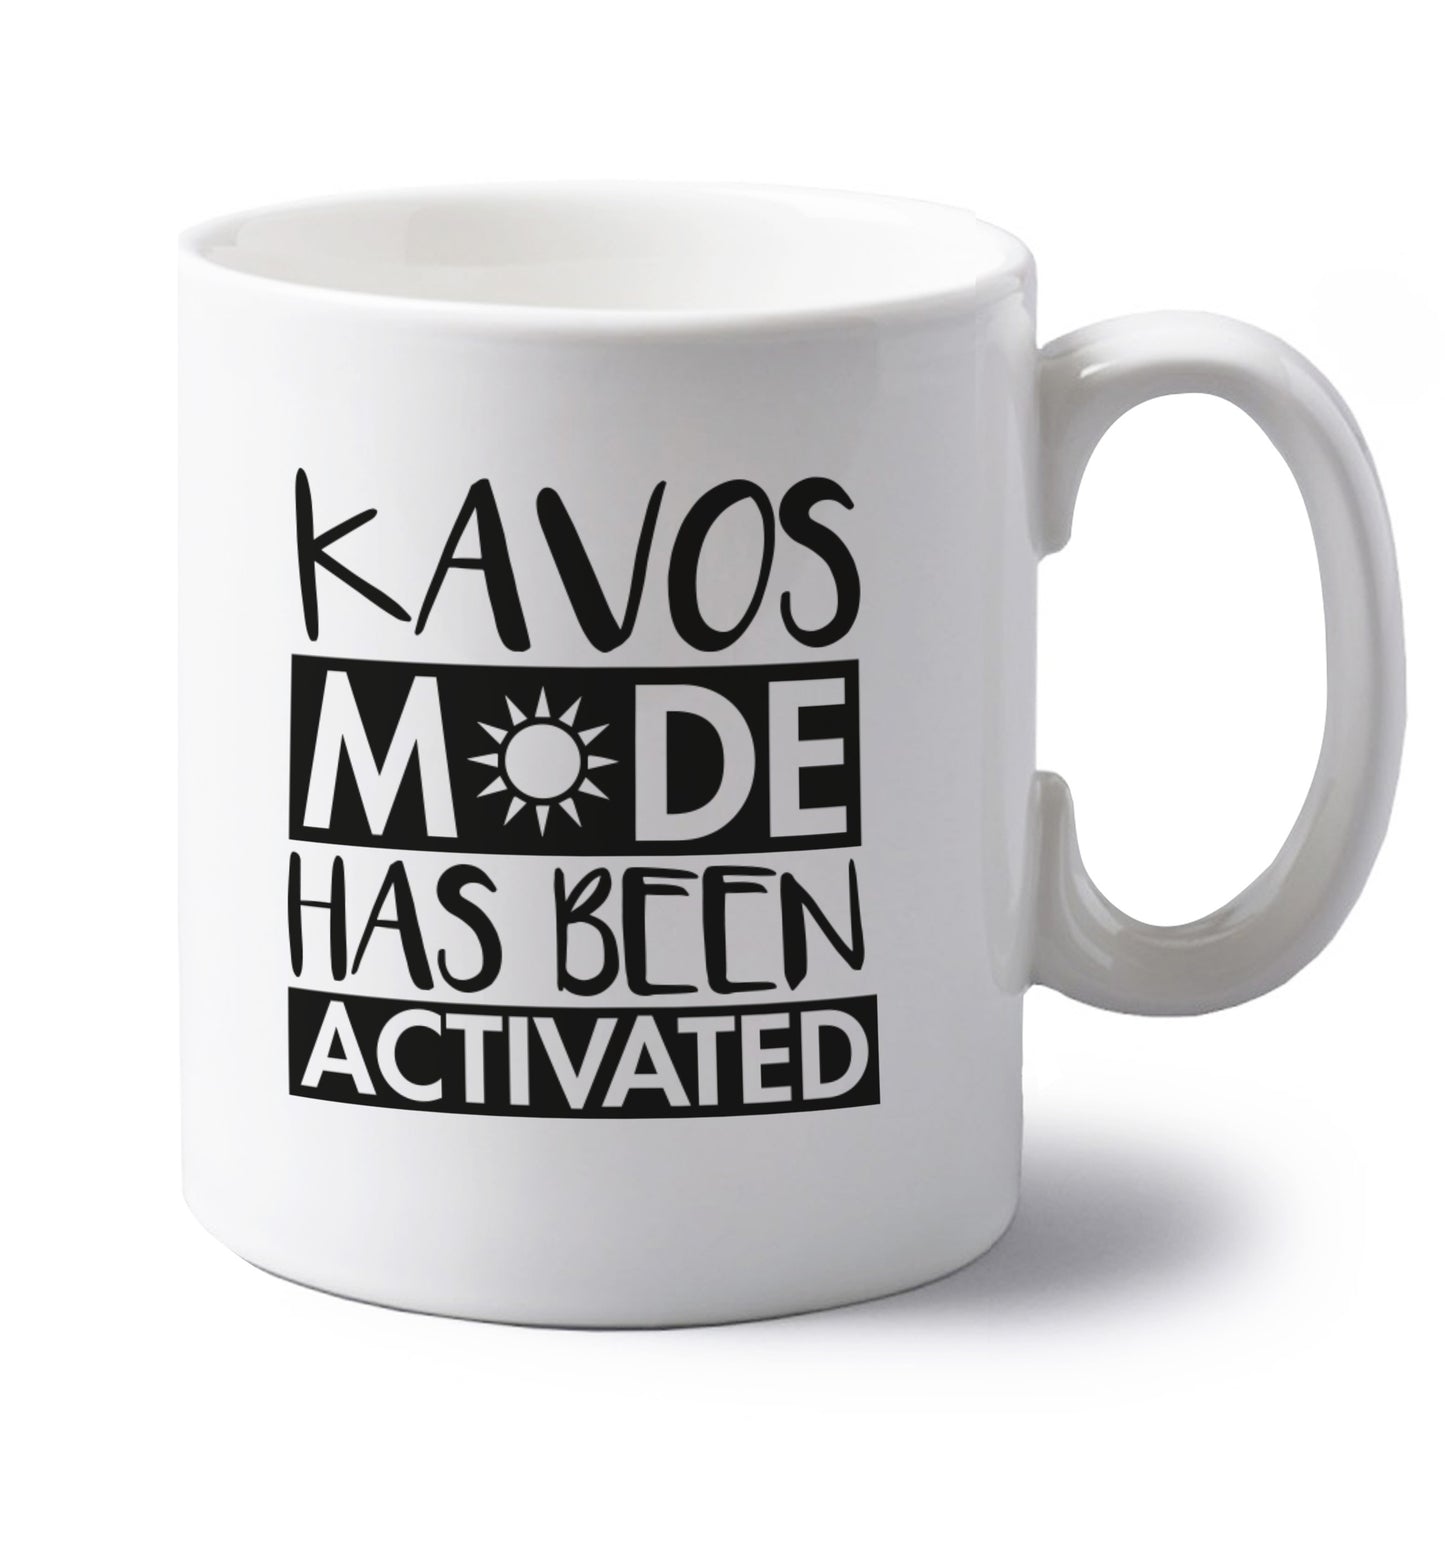 Kavos mode has been activated left handed white ceramic mug 